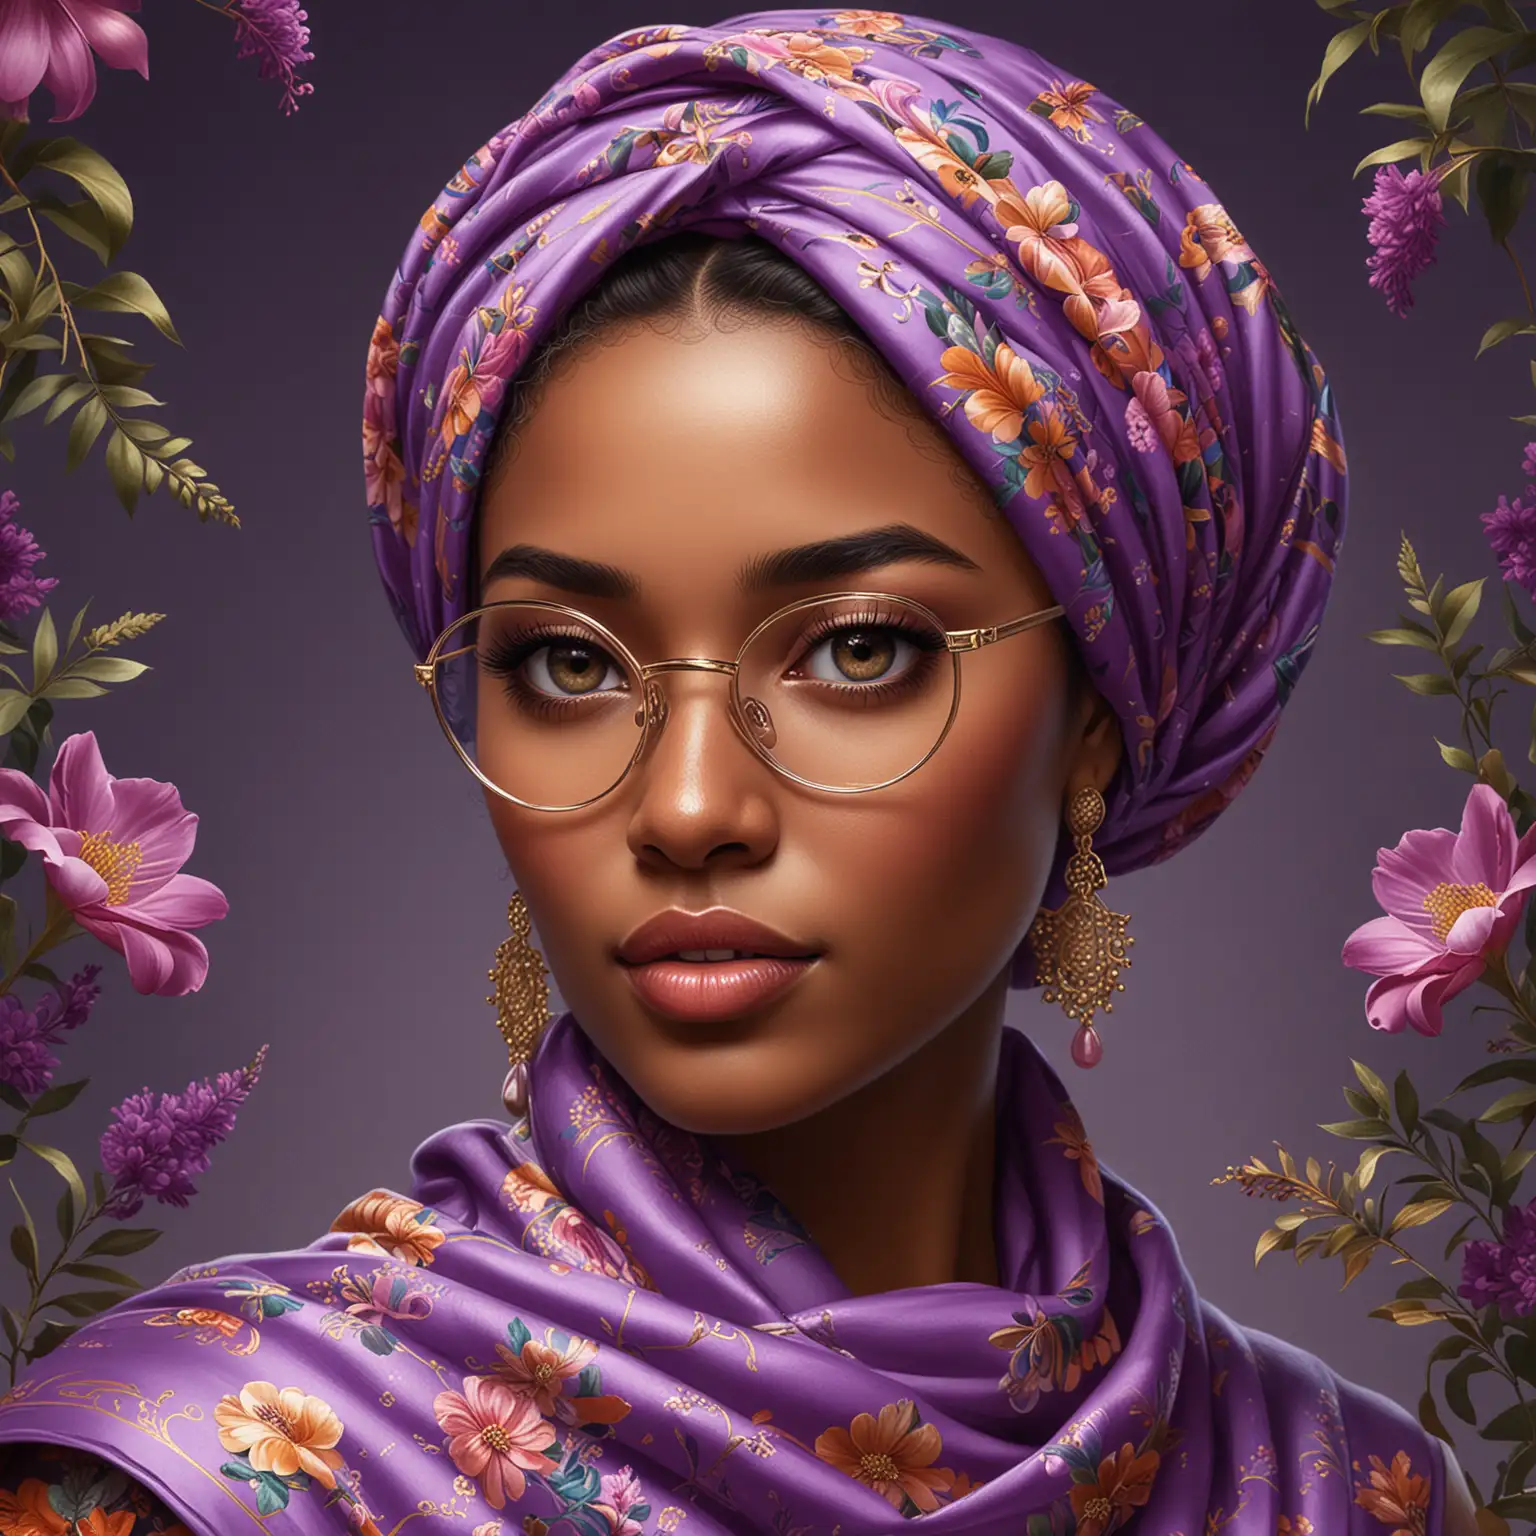 Sophisticated Ebony Woman with Floral Headscarf and Round Glasses